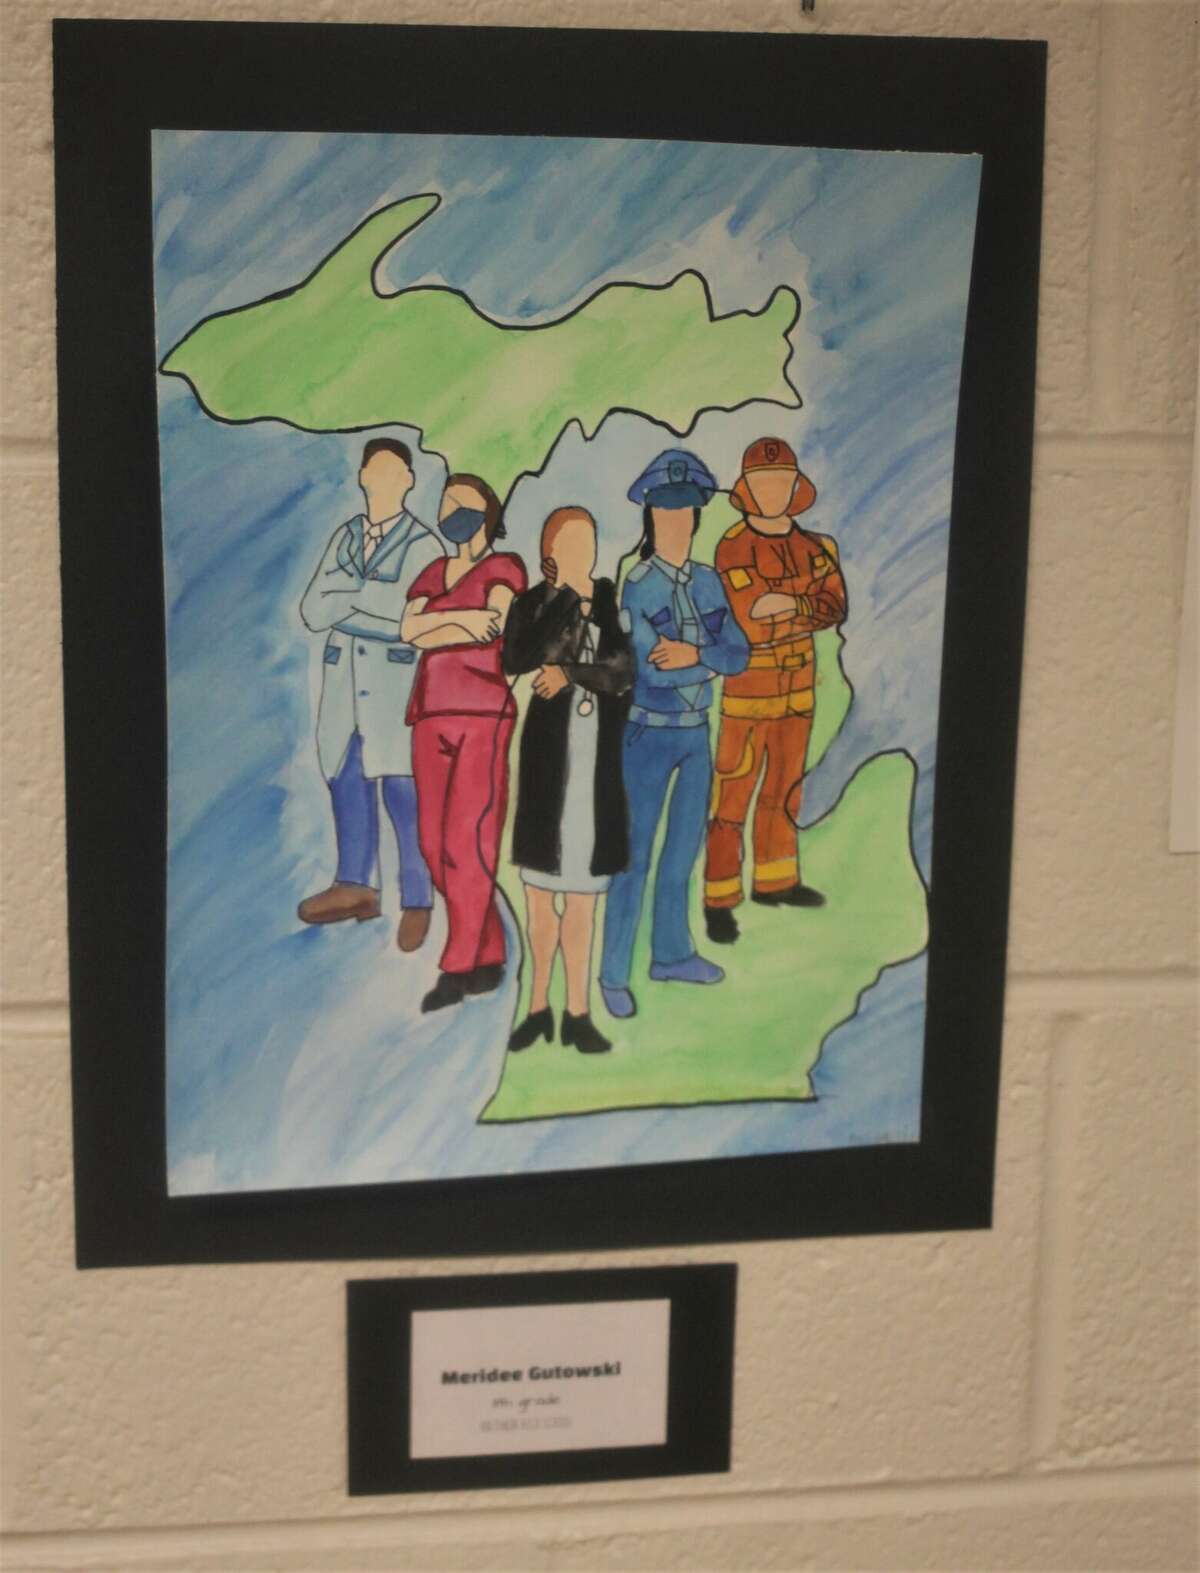 The Manistee County Courthouse is hosting a student art exhibit honoring first responders through July 1.